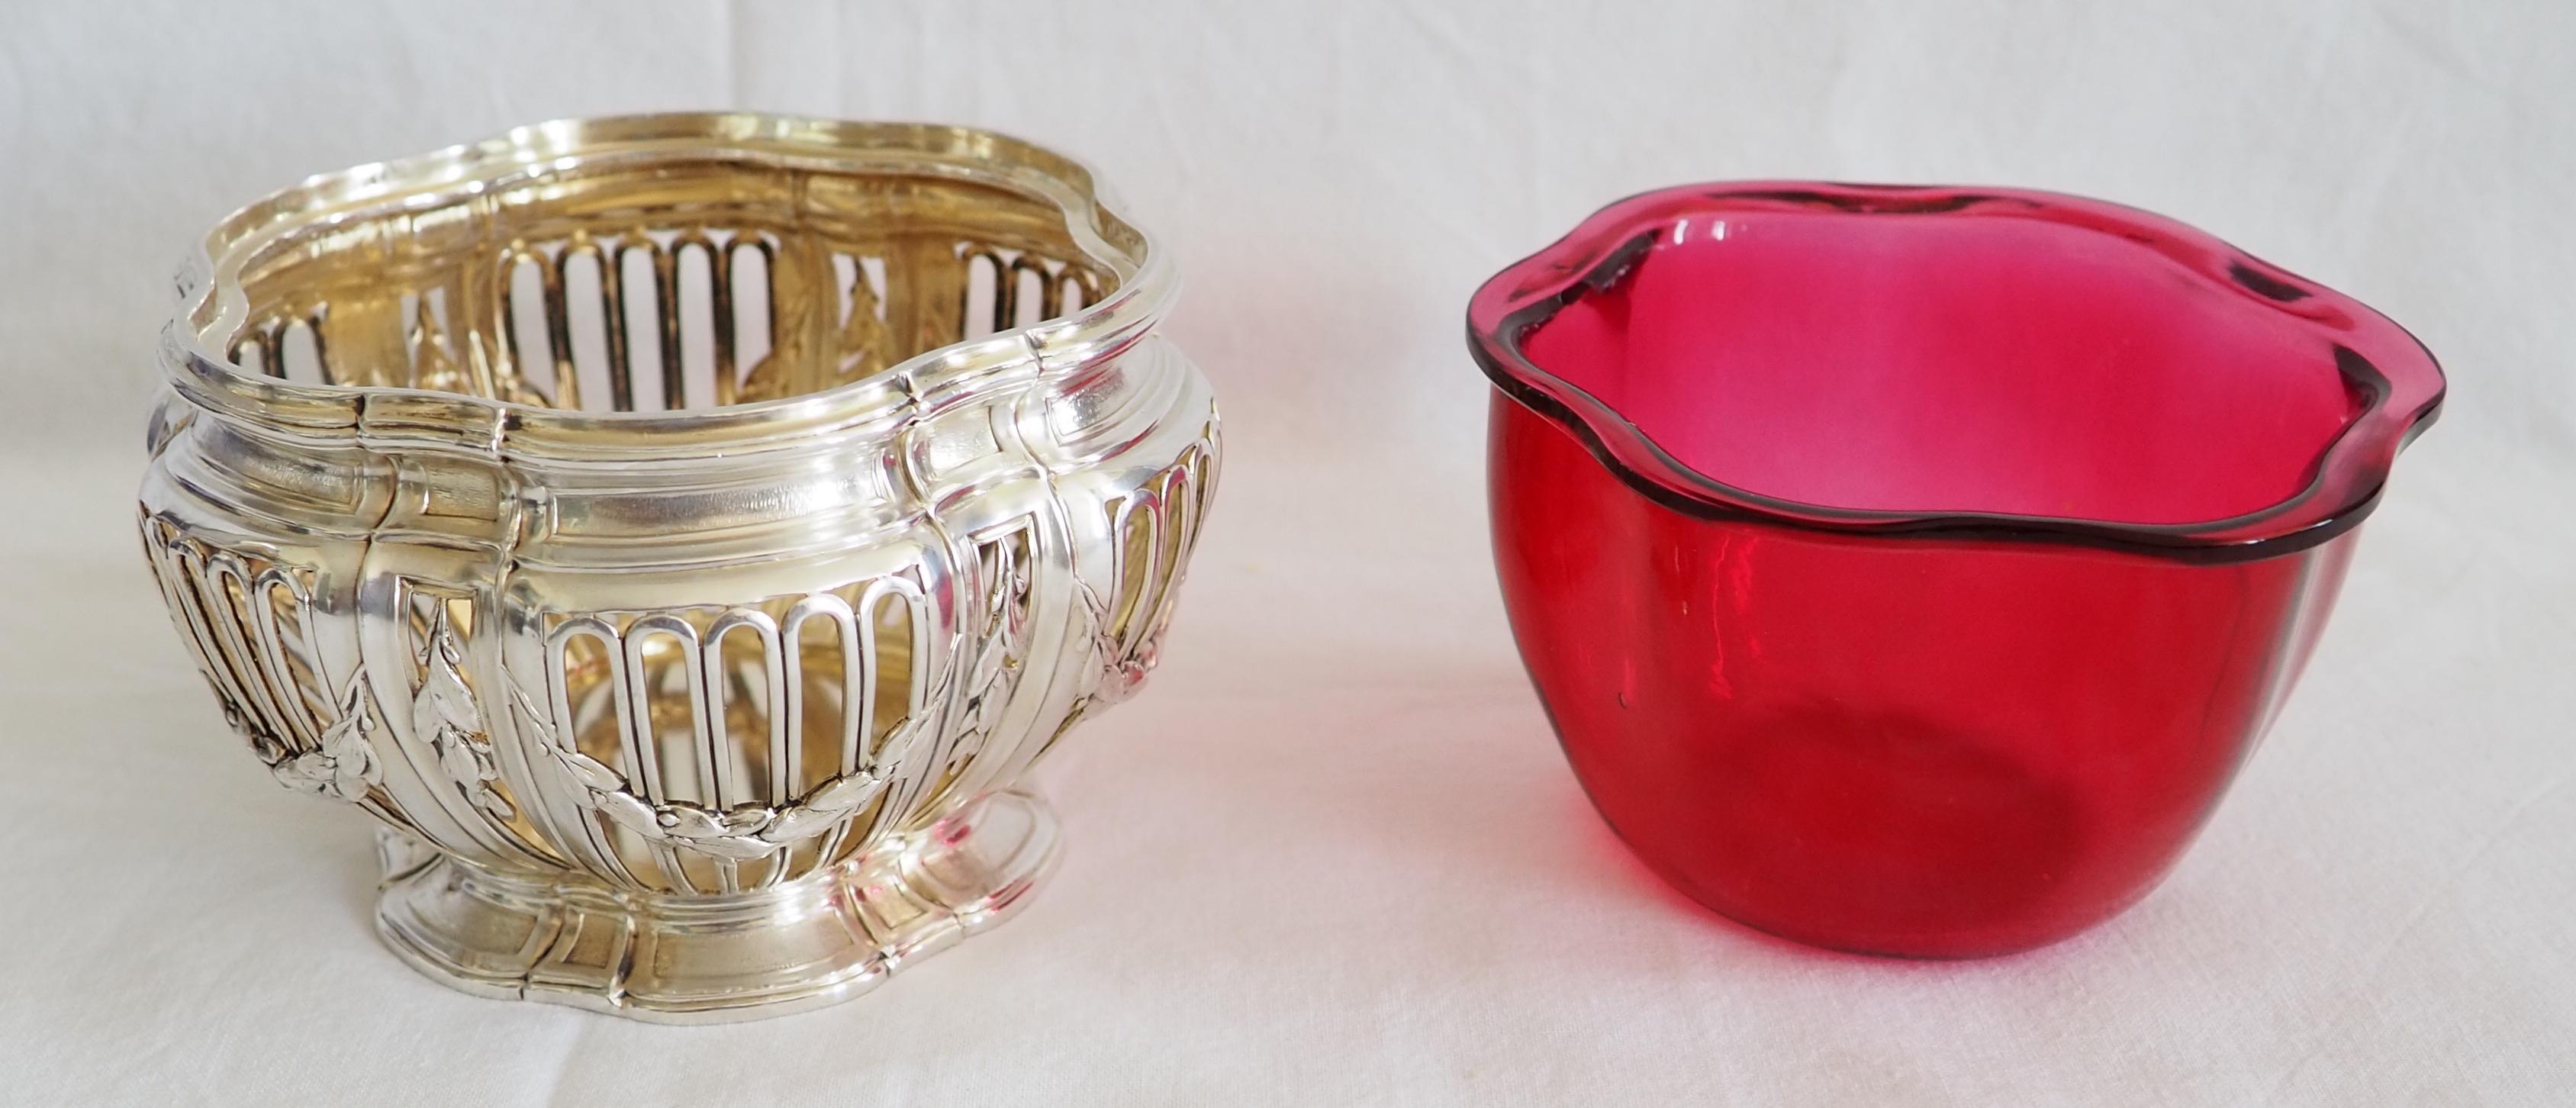 Late 19th Century Sterling silver, vermeil and Baccarat crystal Louis XVI style bowl / ramekin